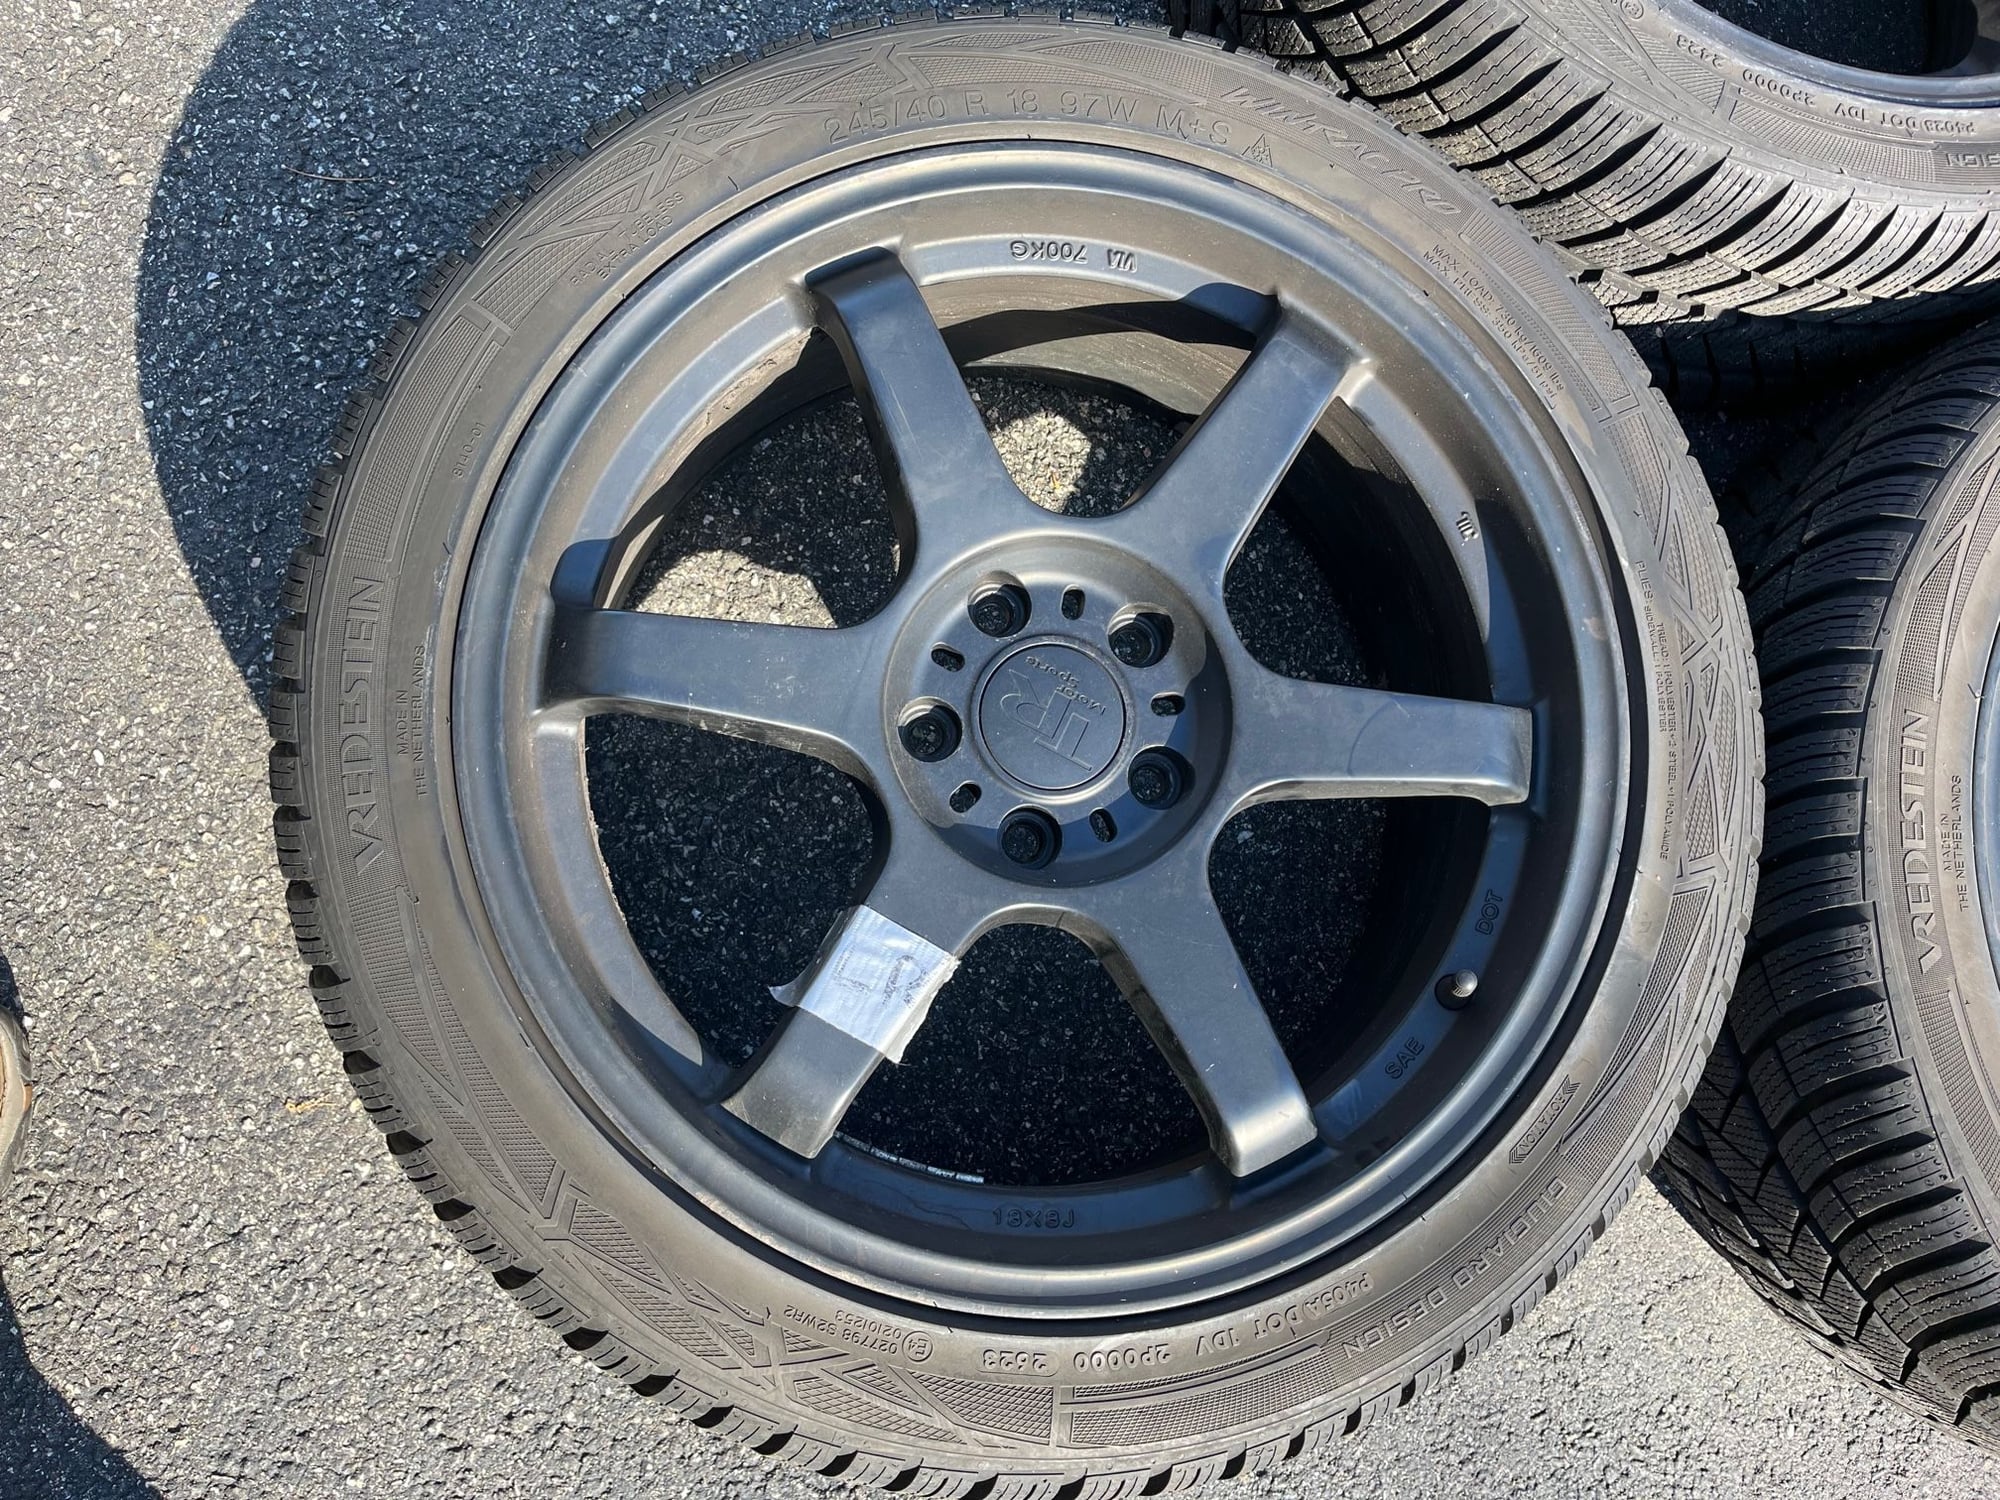 Wheels and Tires/Axles - $800 Full Winter set 18x8 TRMotorsport C4 Black w/ 245/40R18 Vredestein WintracPro XL - Used - Wilmington, MA 1887, United States